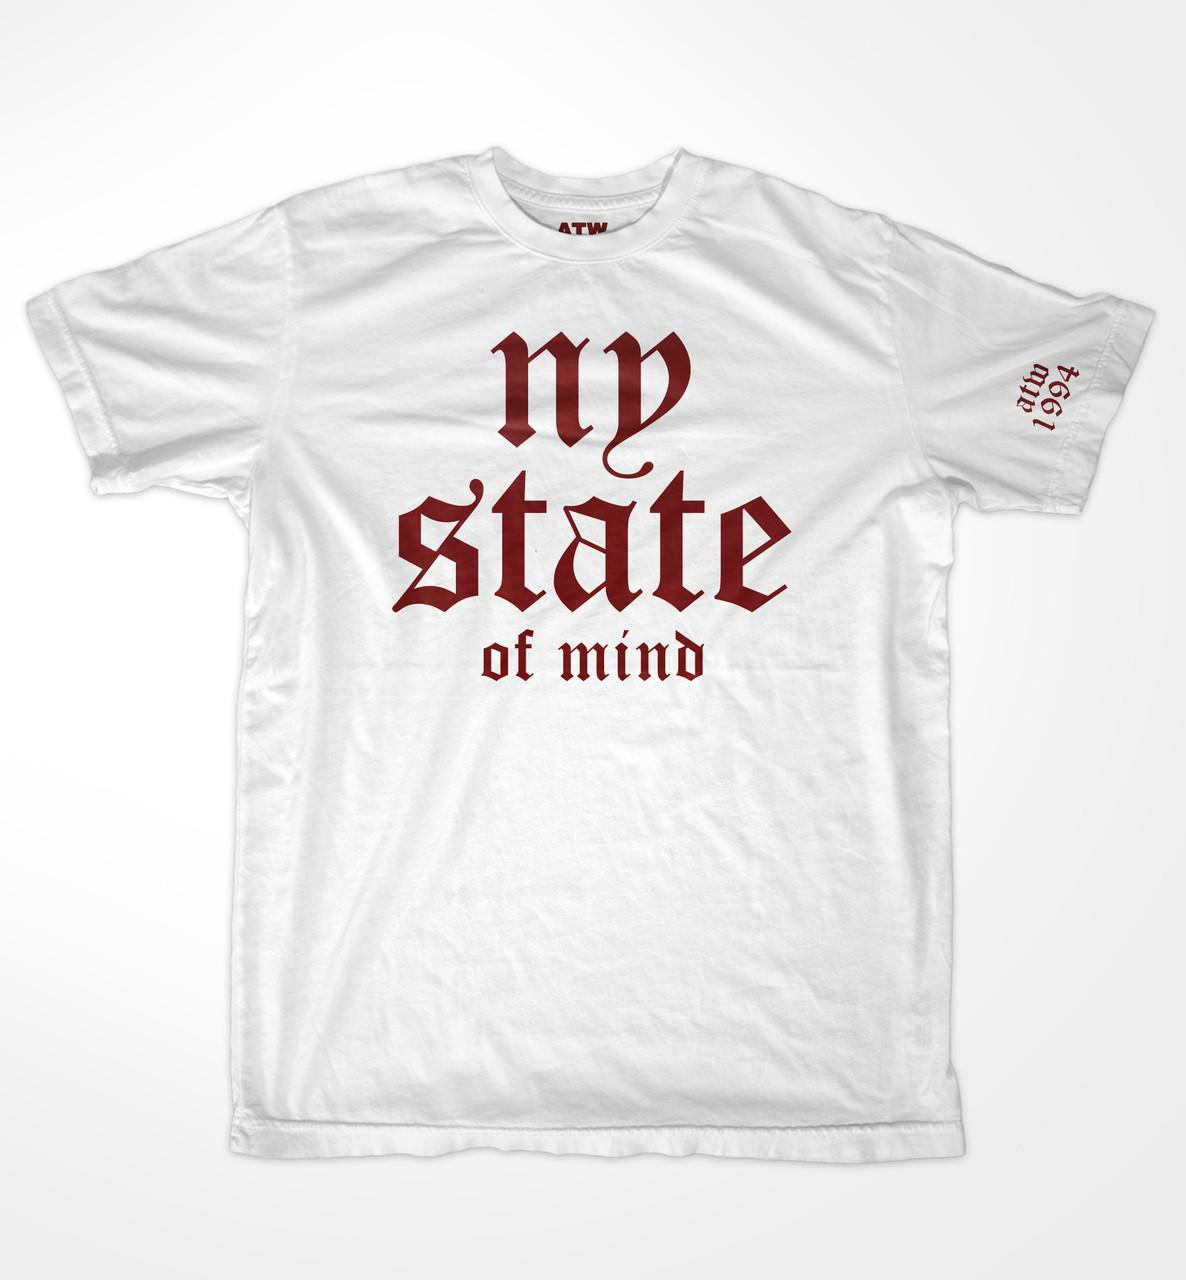 New York State of Mind T-Shirt for New York Baseball Fans (NYM